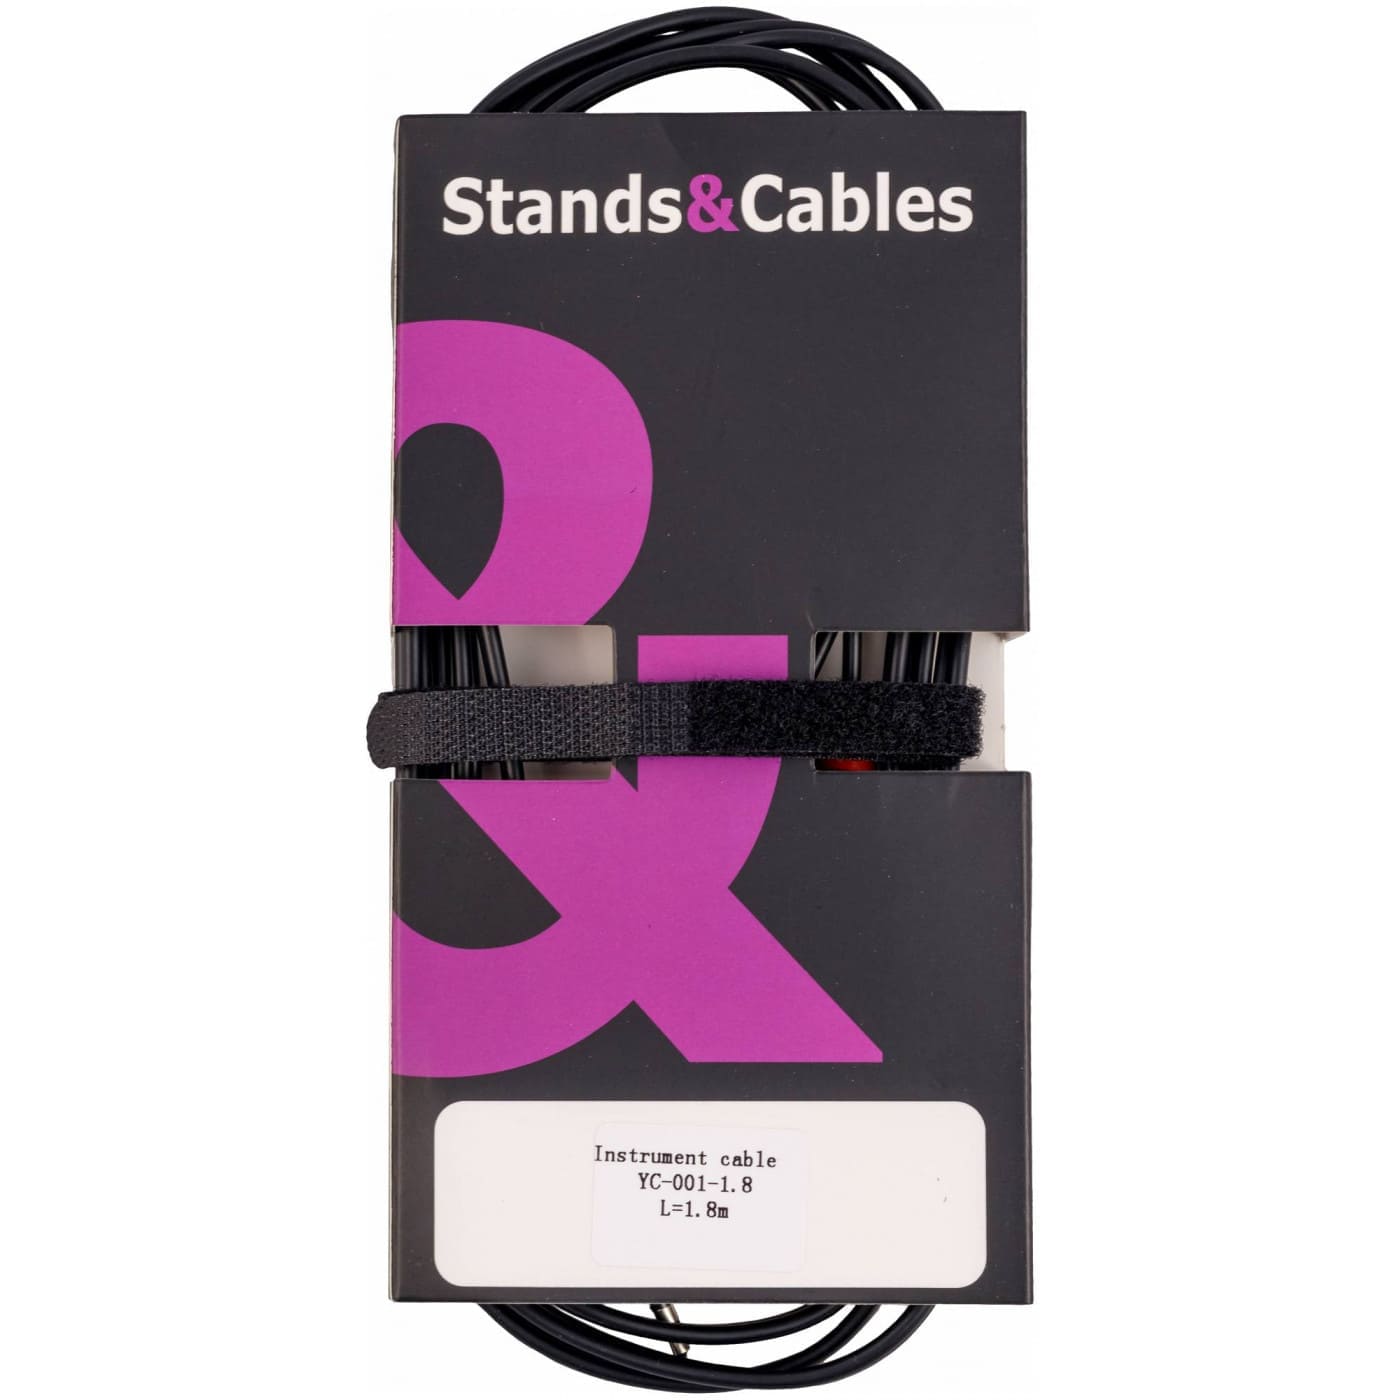 STANDS & CABLES YC-001 1.8 - Аудио-кабель